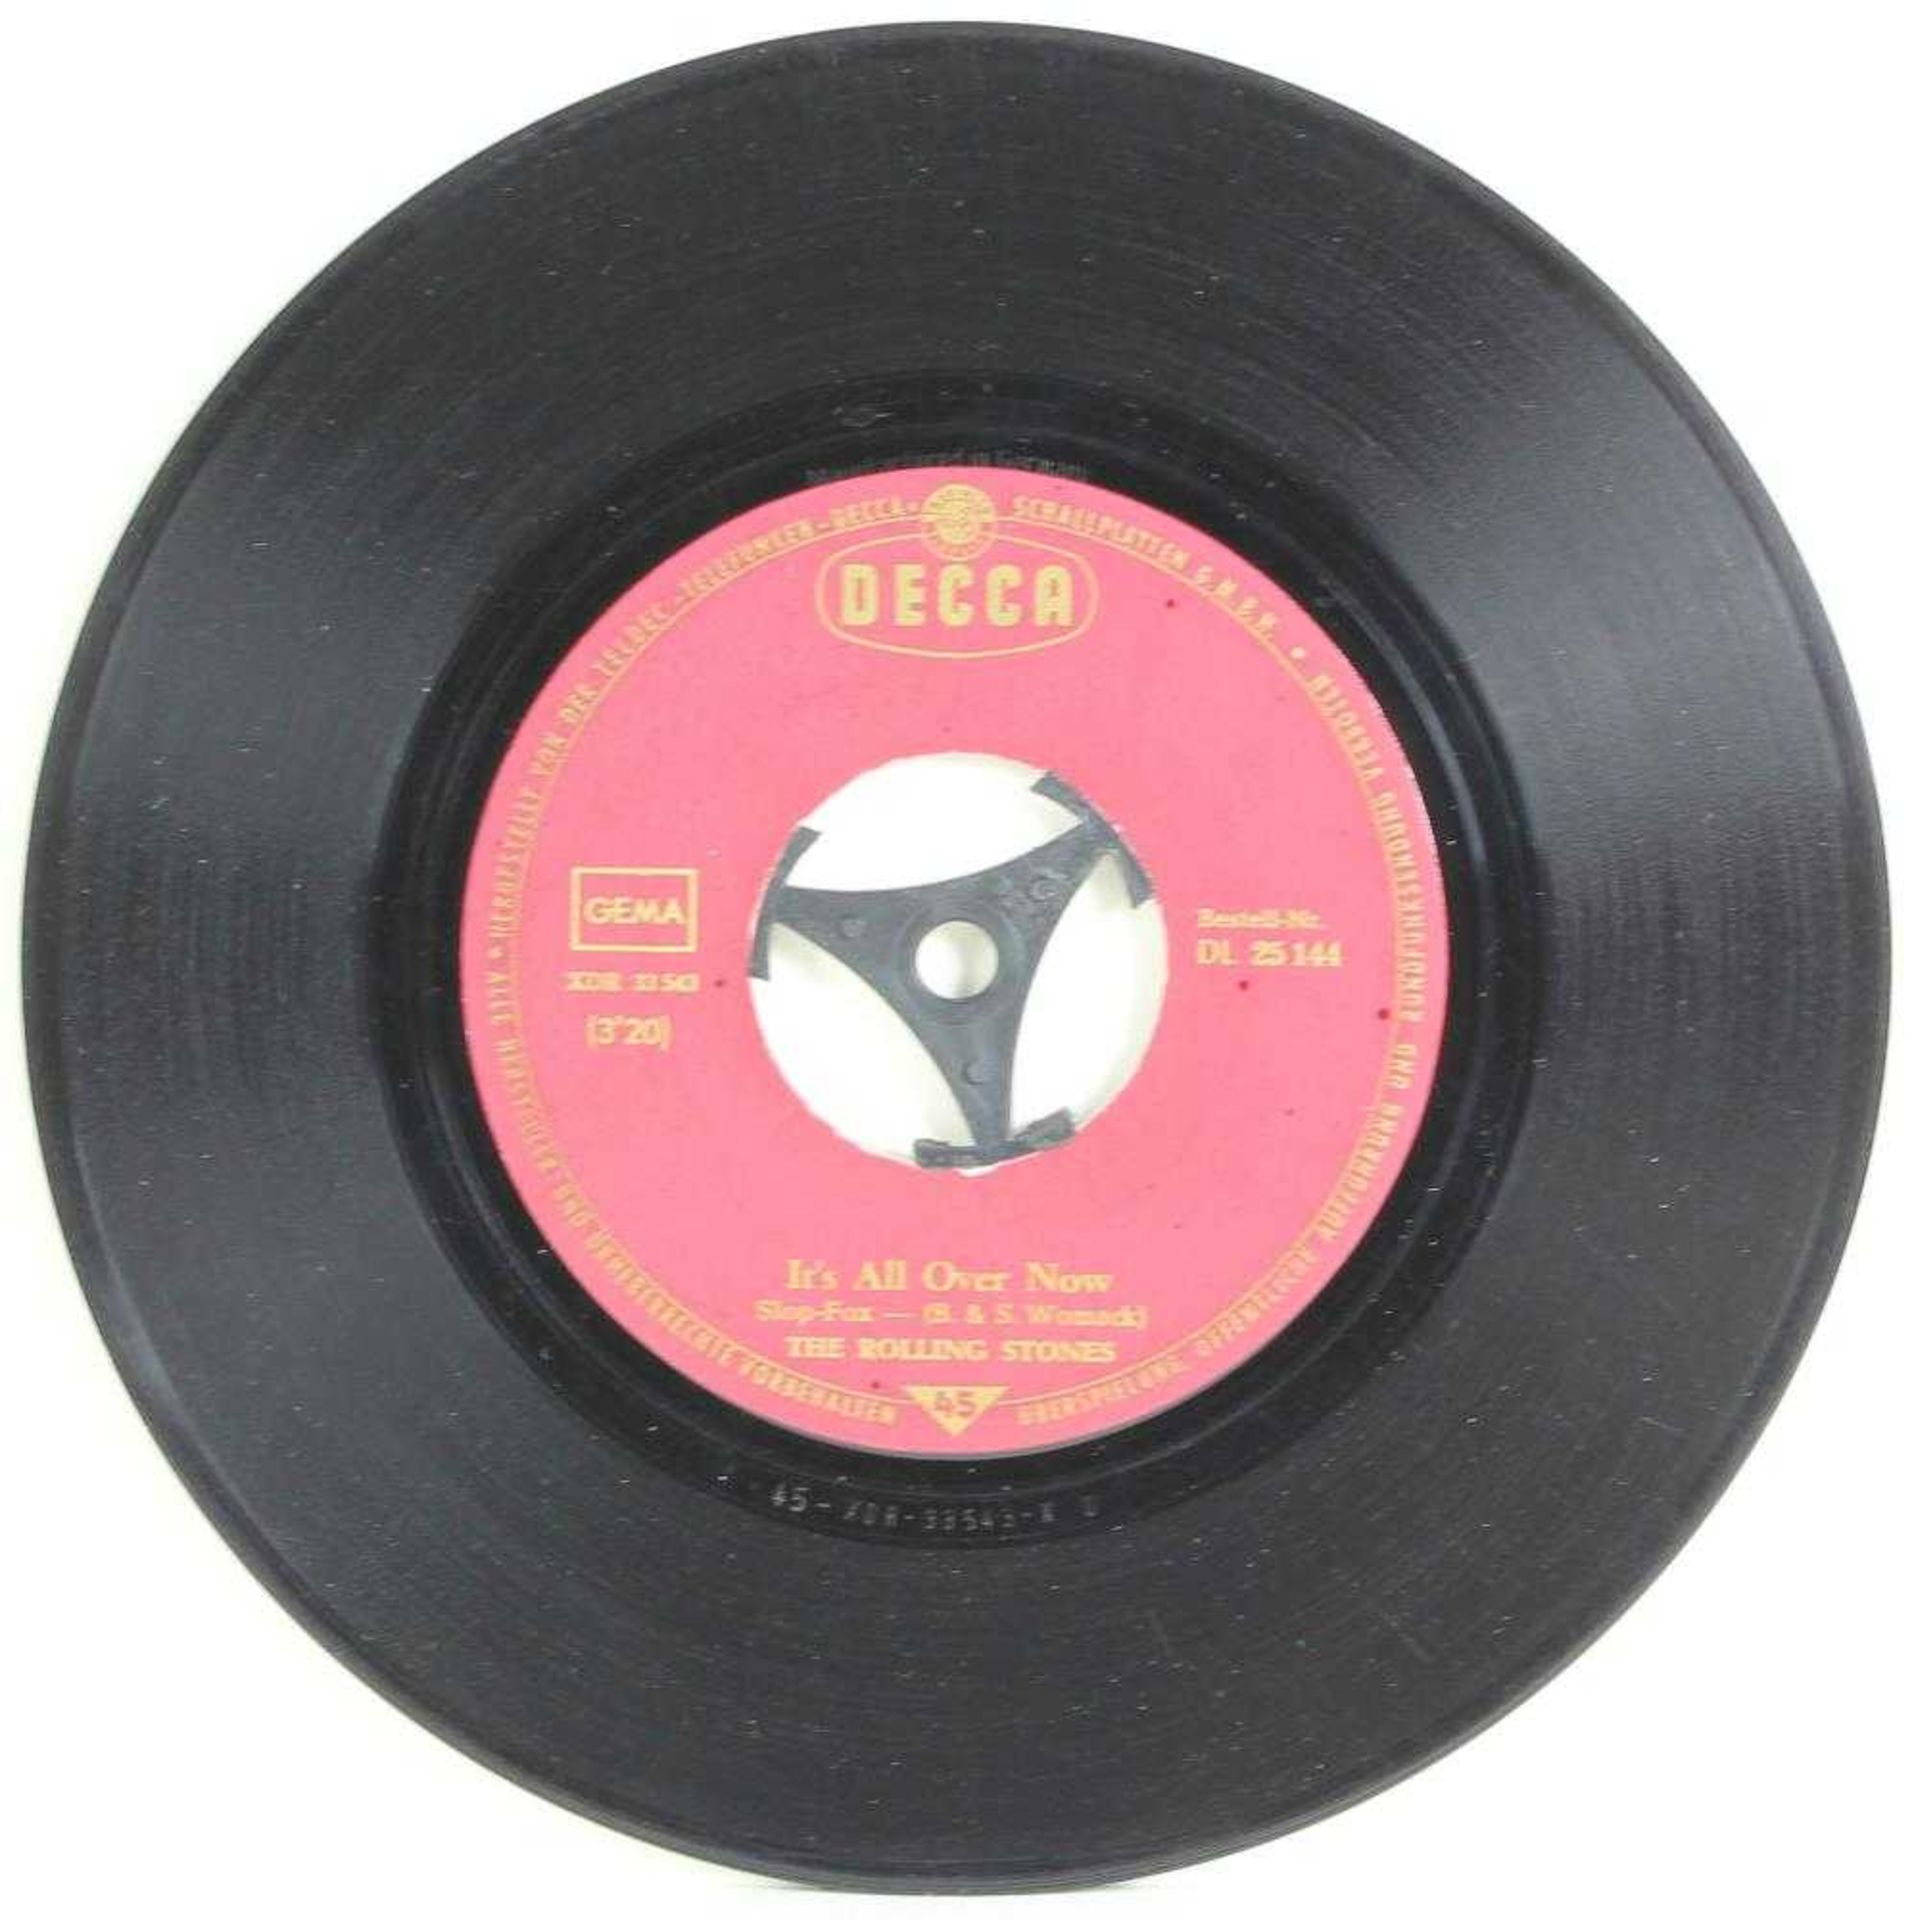 The Rolling Stones It´s All Over Now, Tell Me. Single, Decca DL 25144. (deutsche Erstpressung 1964). - Image 4 of 4